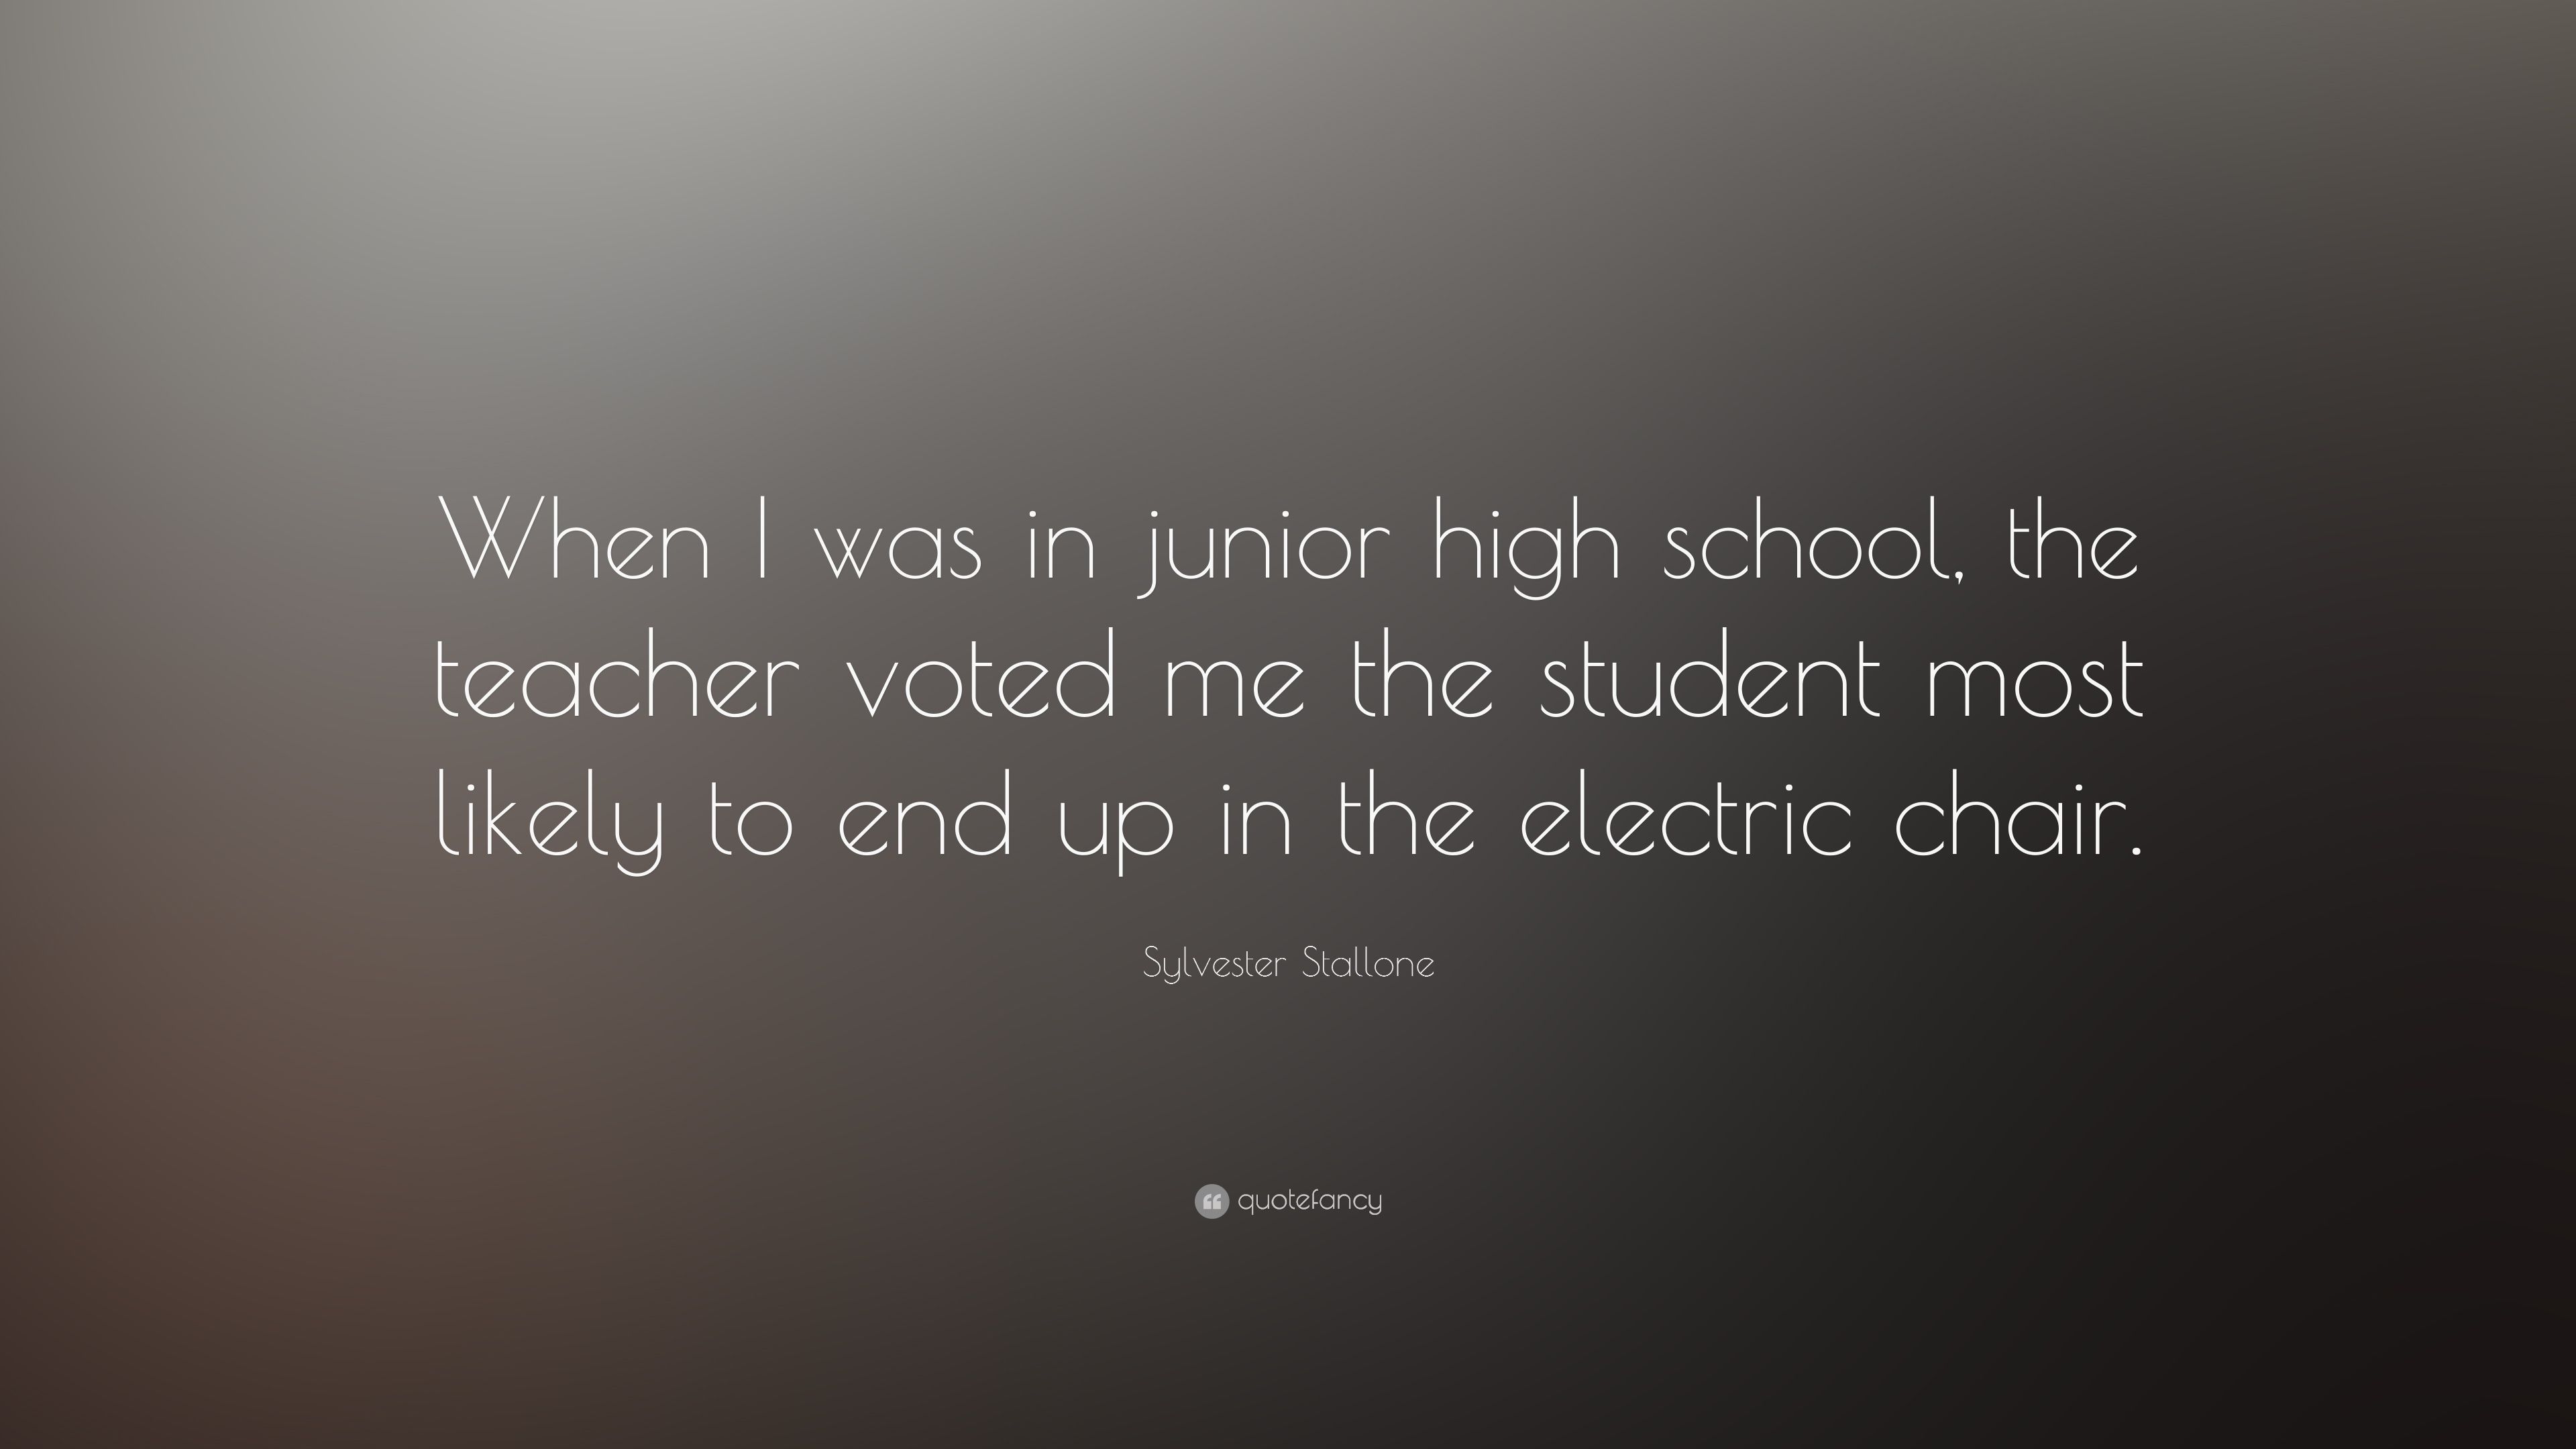 Sylvester Stallone Quote: “When I was in junior high school, the teacher voted me the student most likely to end up in the electric chair.” (14 wallpaper)